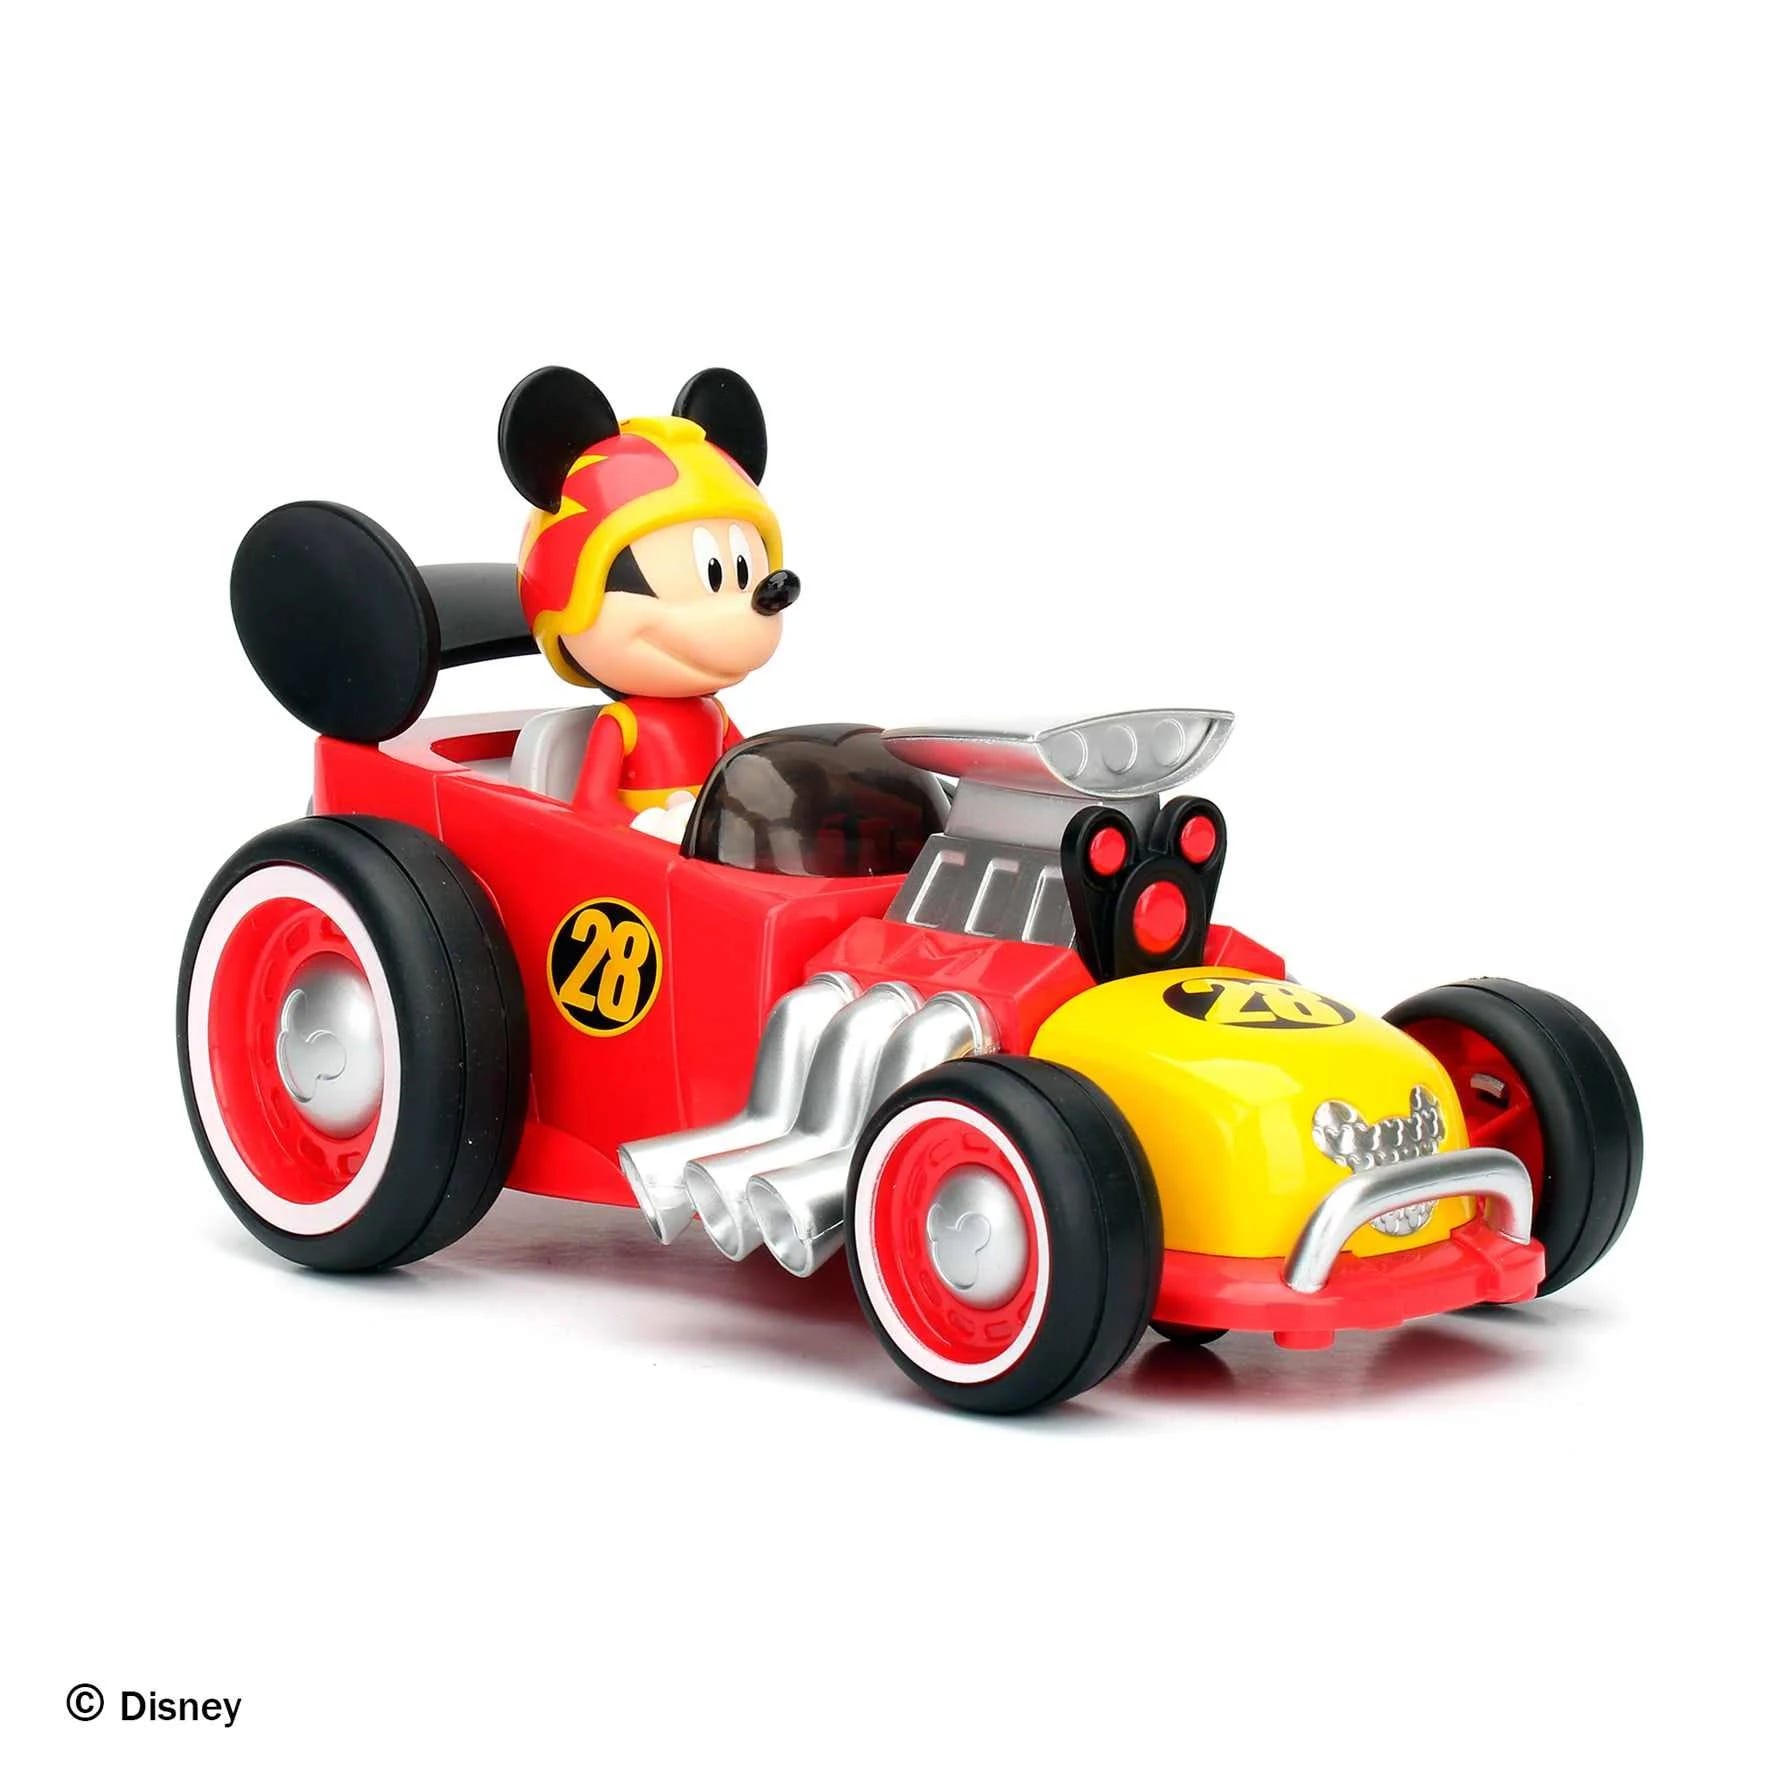 Jada RC Car: Mickey Mouse Roadster for Imaginative Play | Image